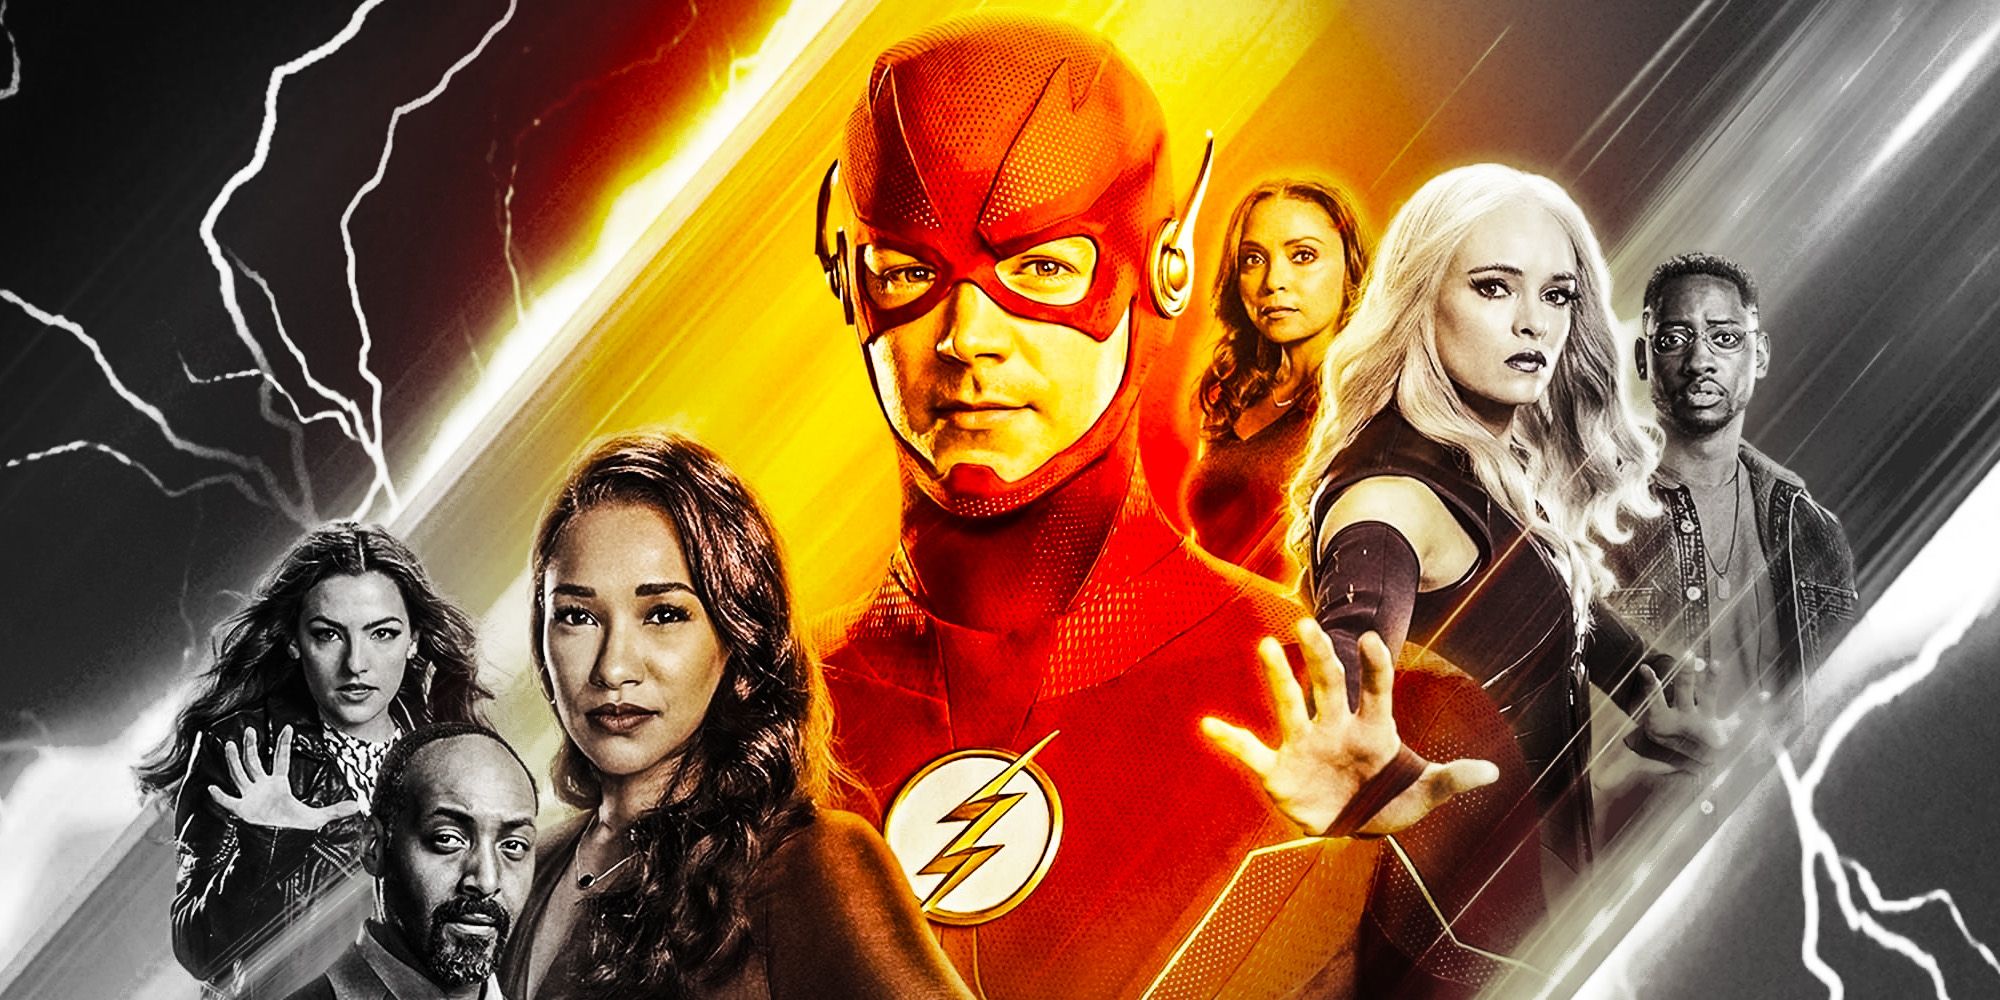 Grant Gustin’s Popularity As The Flash Shown In Arrowverse Netflix Viewership Data